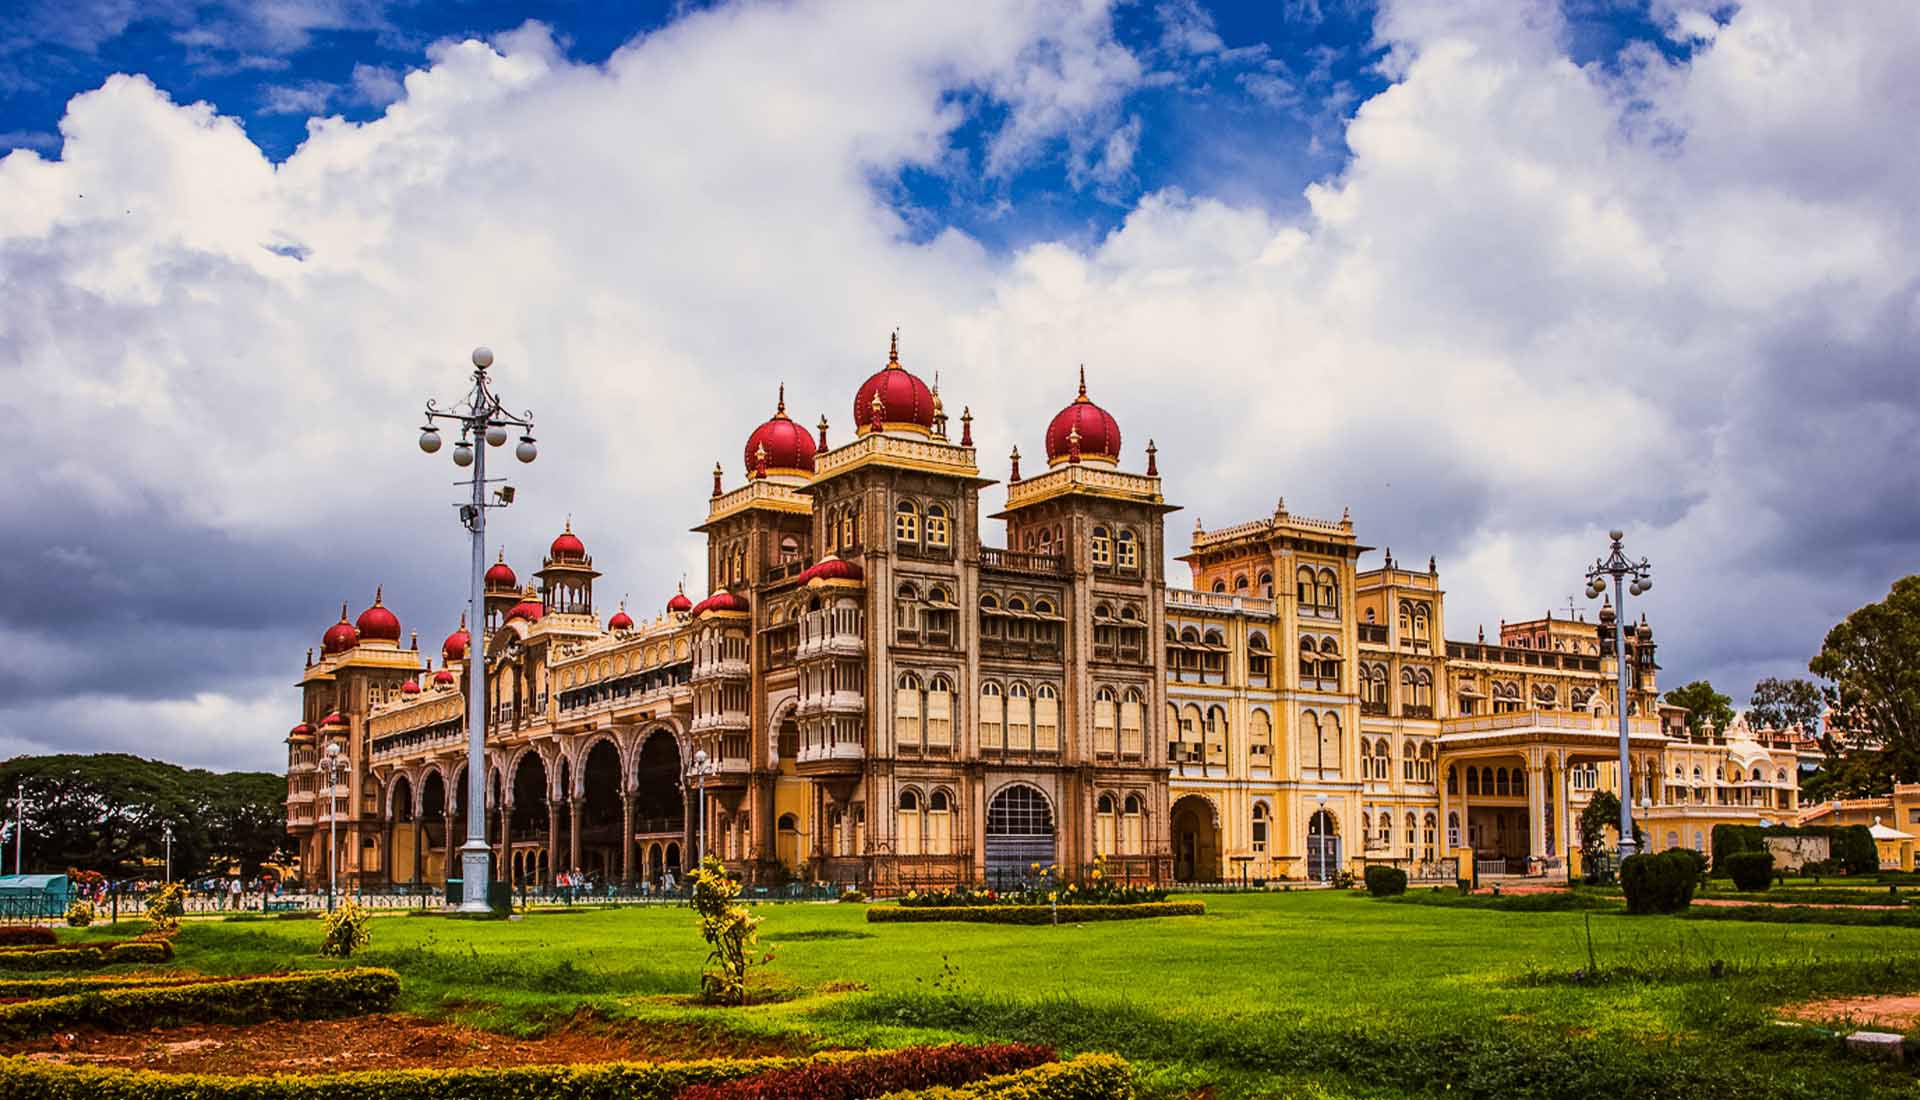 Mysore Palace one of the most beautiful palaces in the world